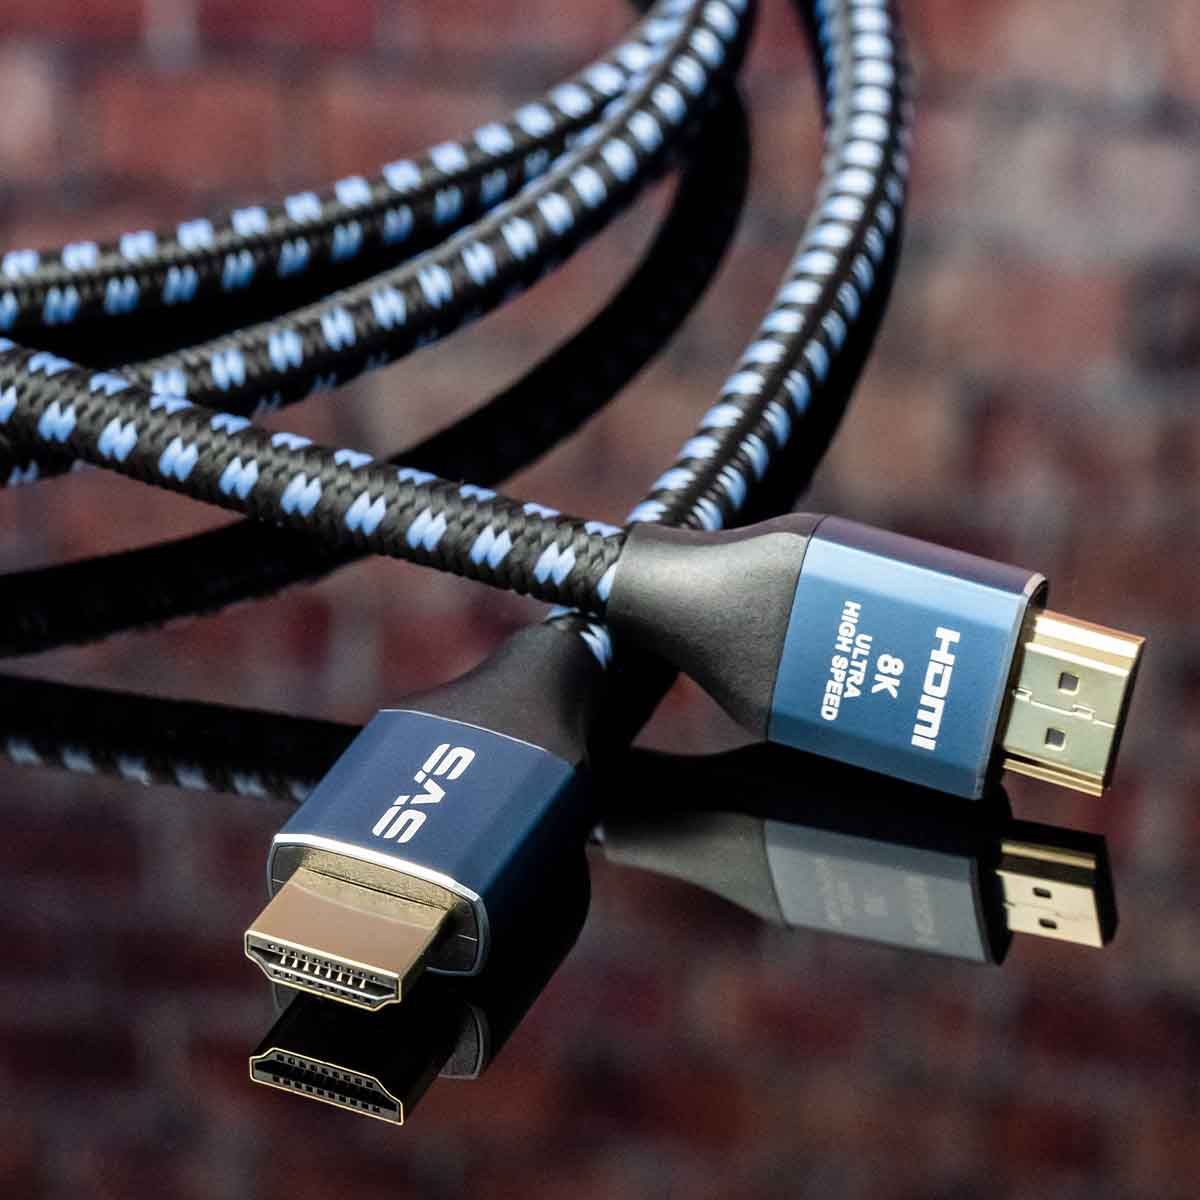 SVS SoundPath Ultra HDMI Cable - glamour shot coiled on table